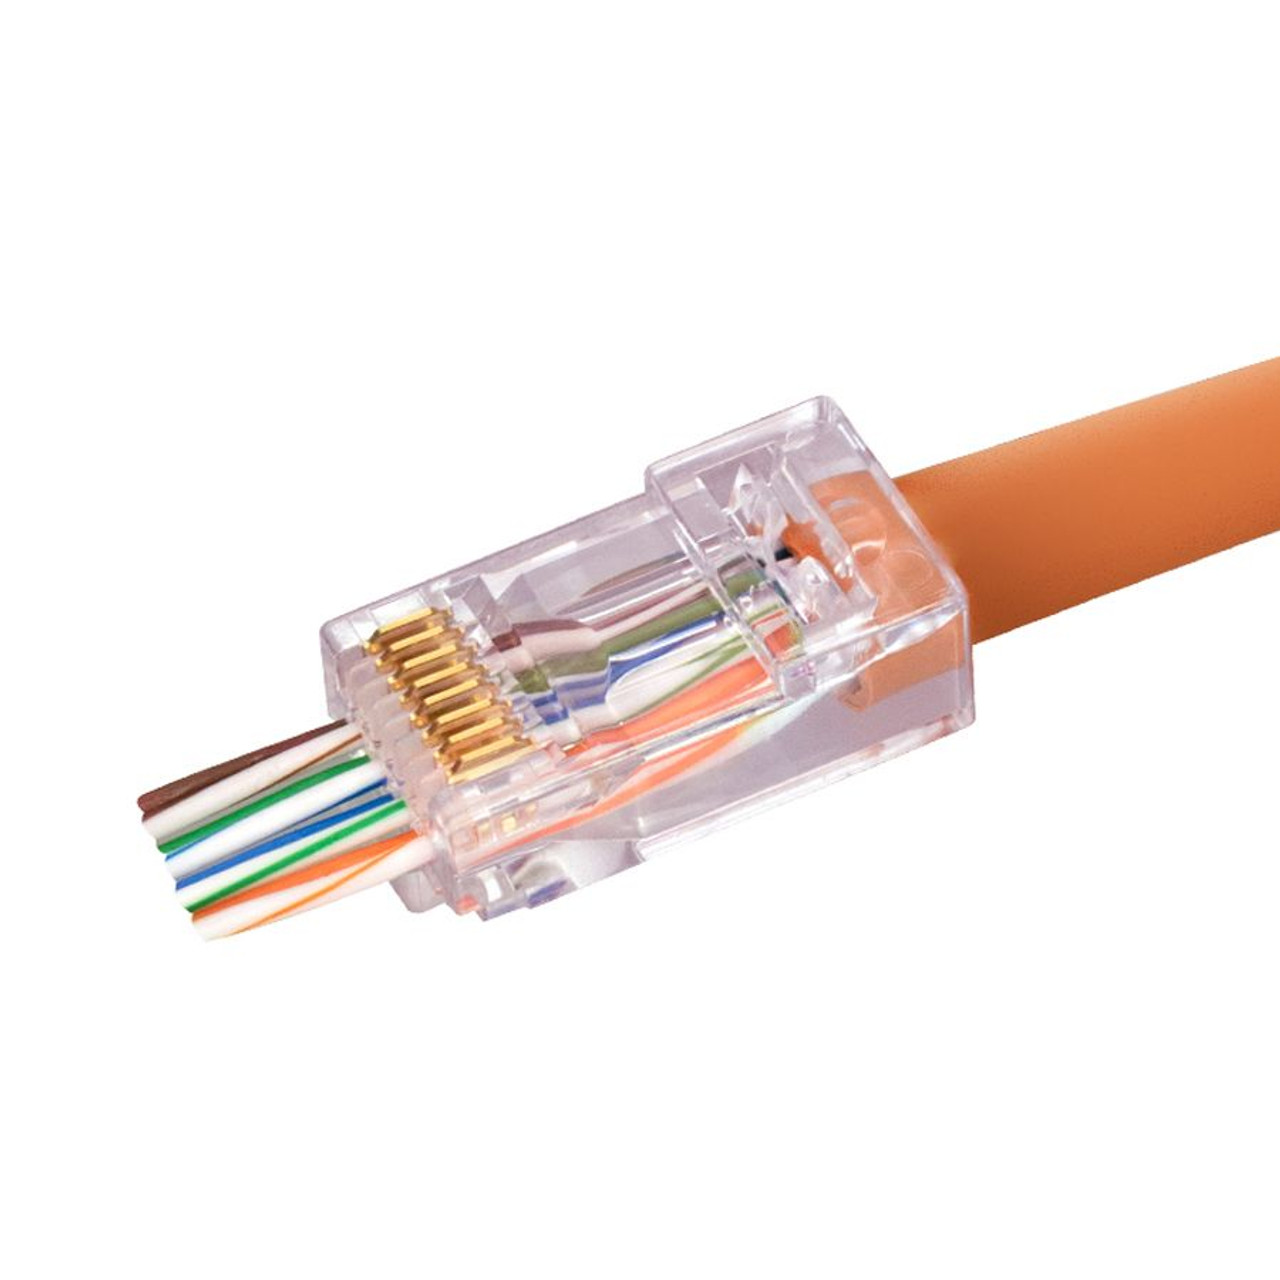 S45-1700 - Cat6/6a Unshielded - Staggered - Pass-Through RJ45 100 PC